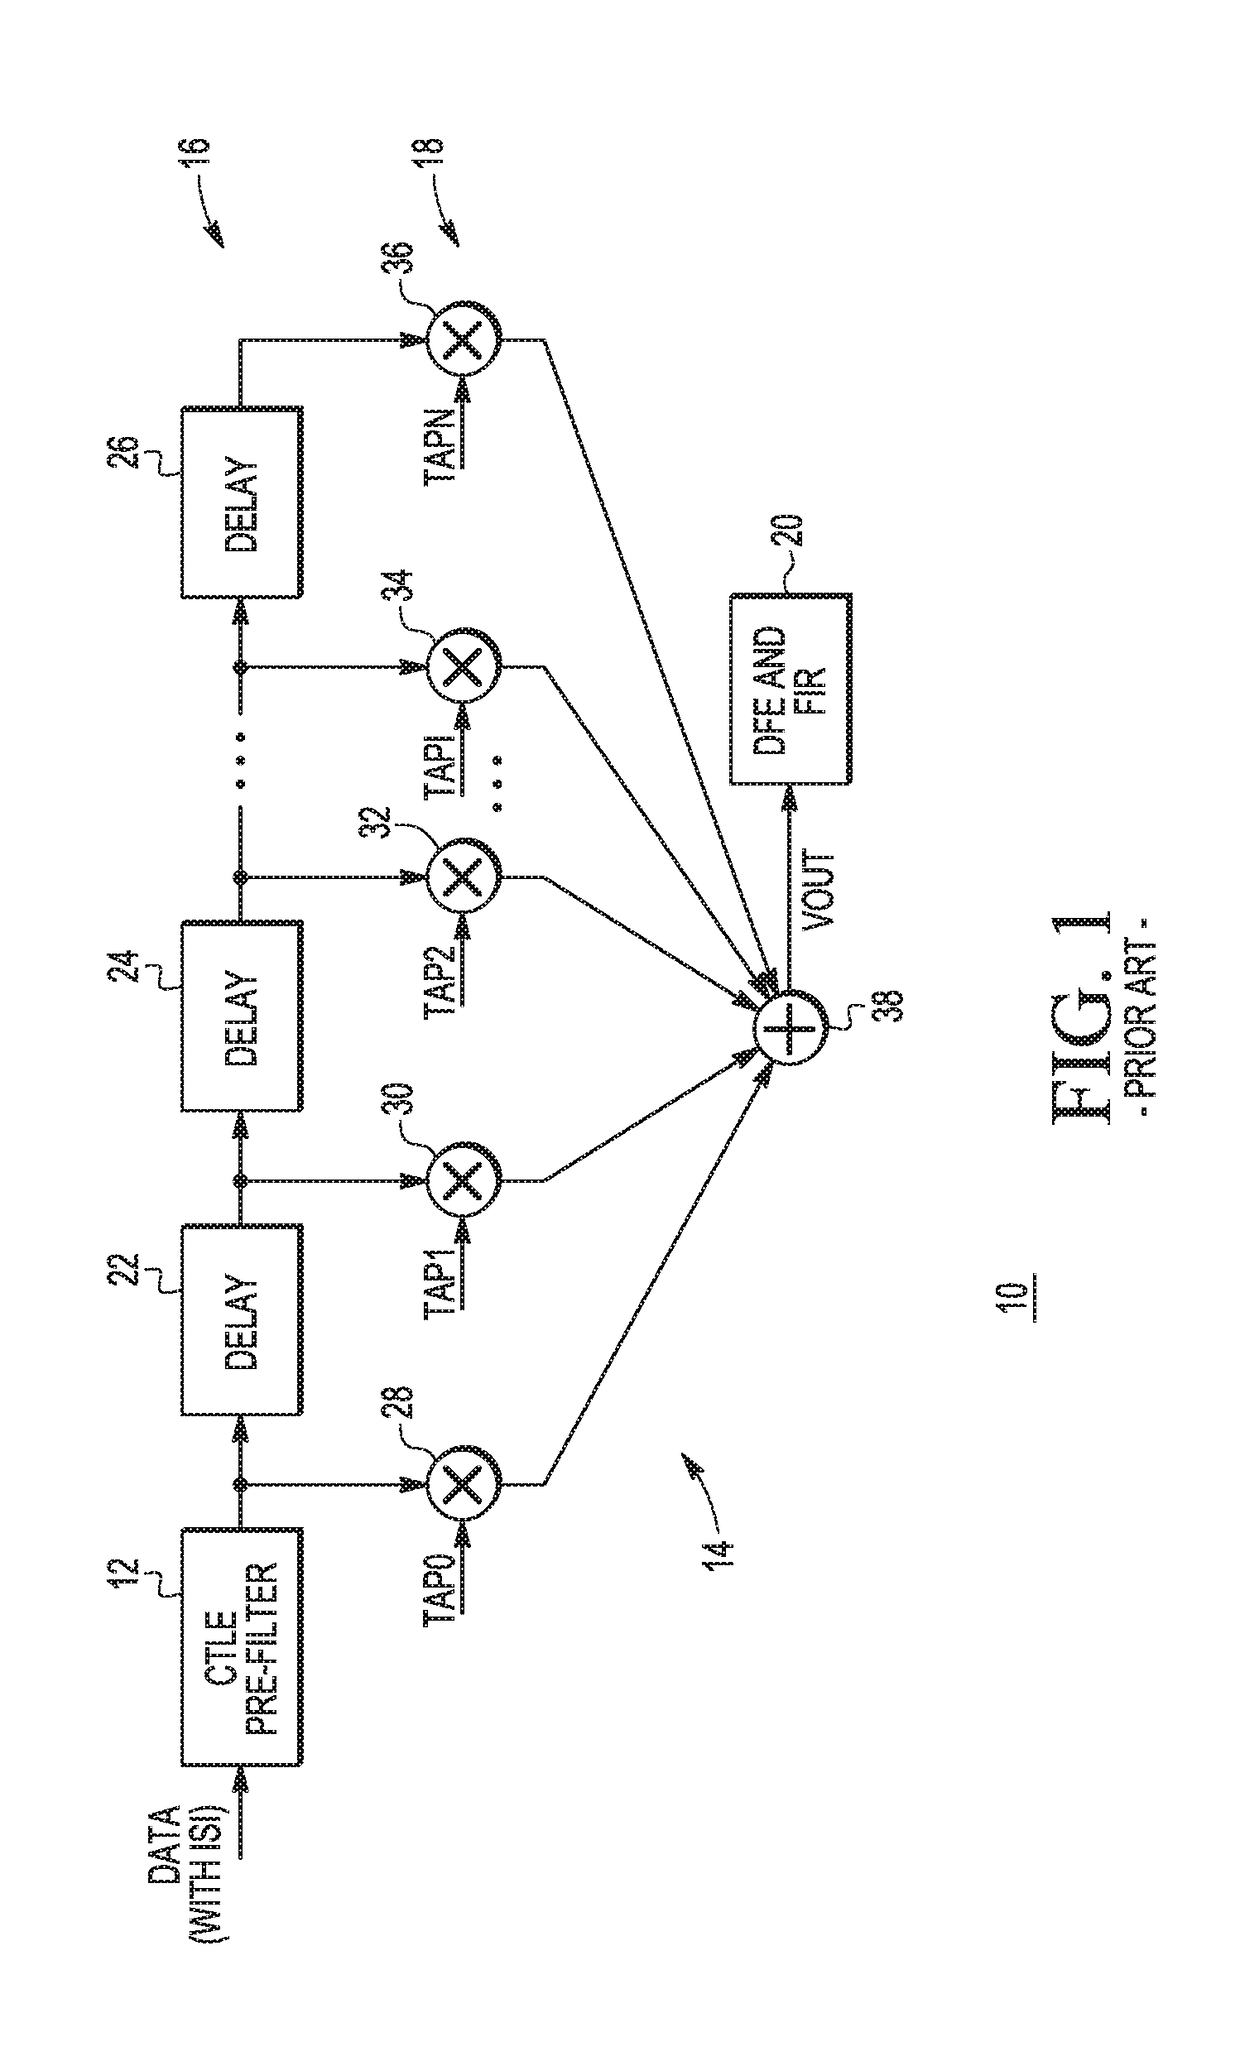 Analog delay cell and tapped delay line comprising the analog delay cell